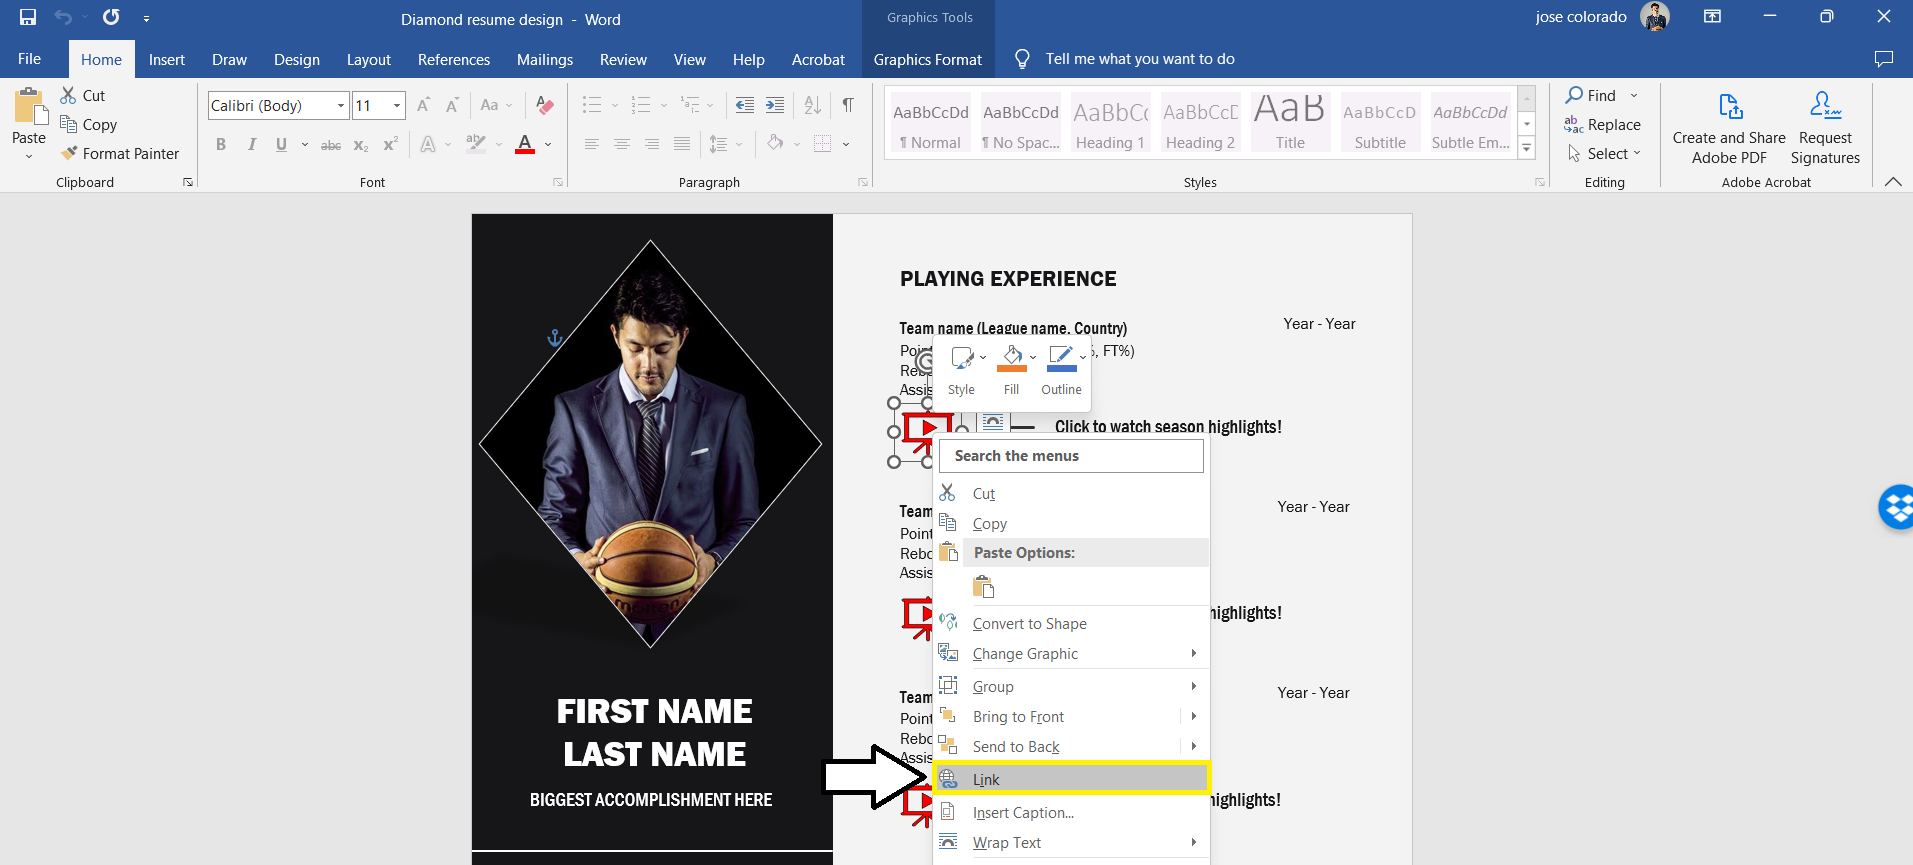 Basketball resumes should be an interactive experience for coaches with highlight videos available.